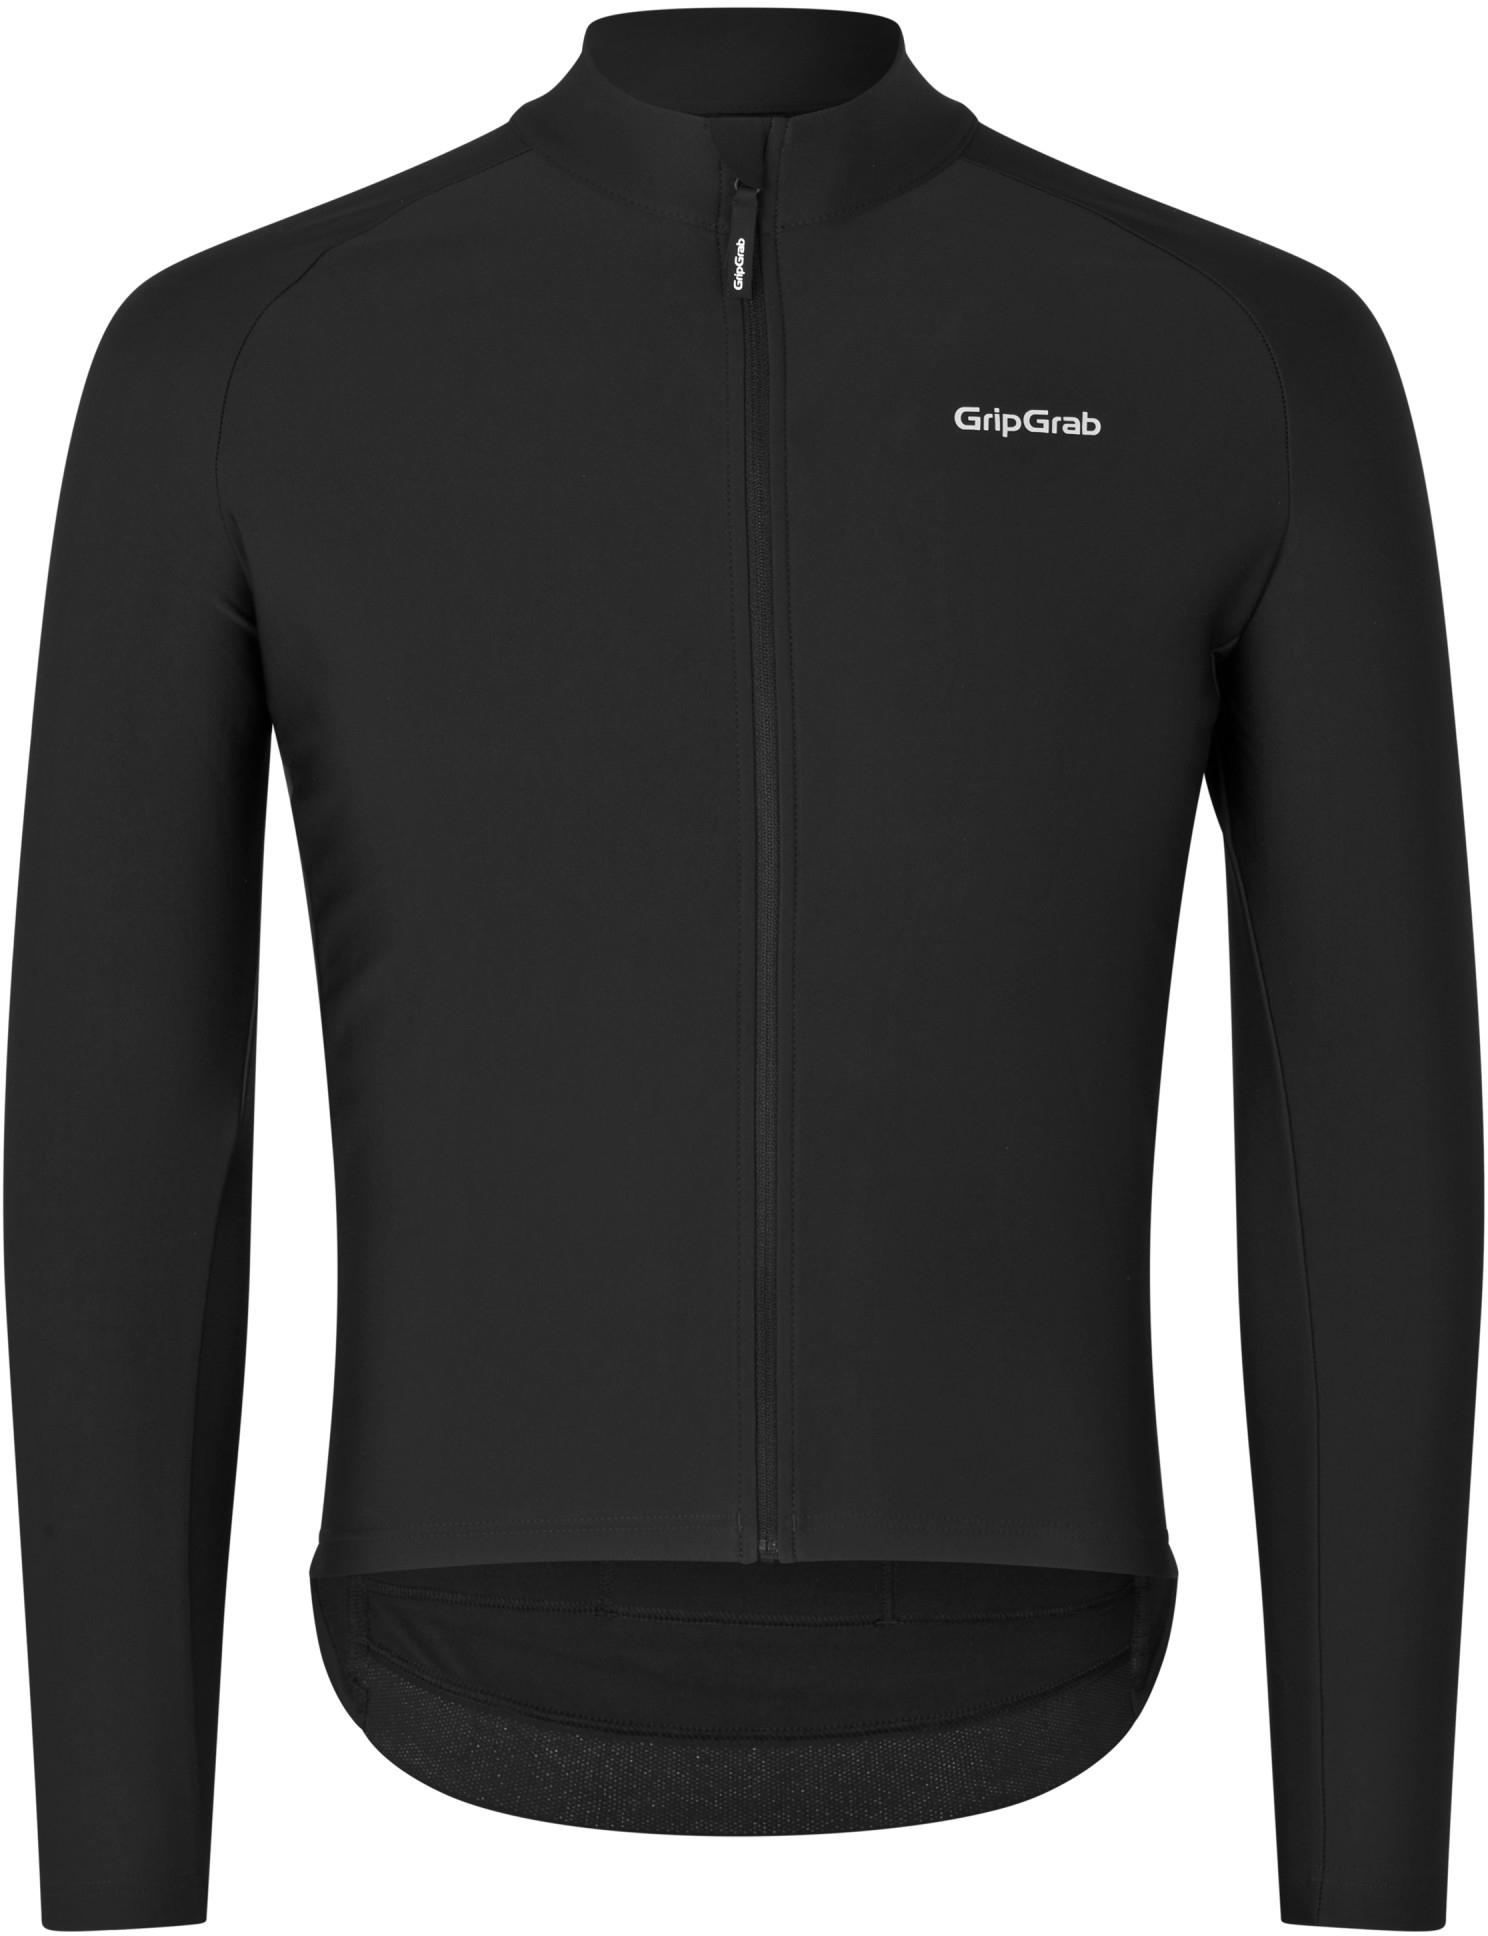 Gripgrab Thermapace Thermal Long Sleeve Jersey  Black